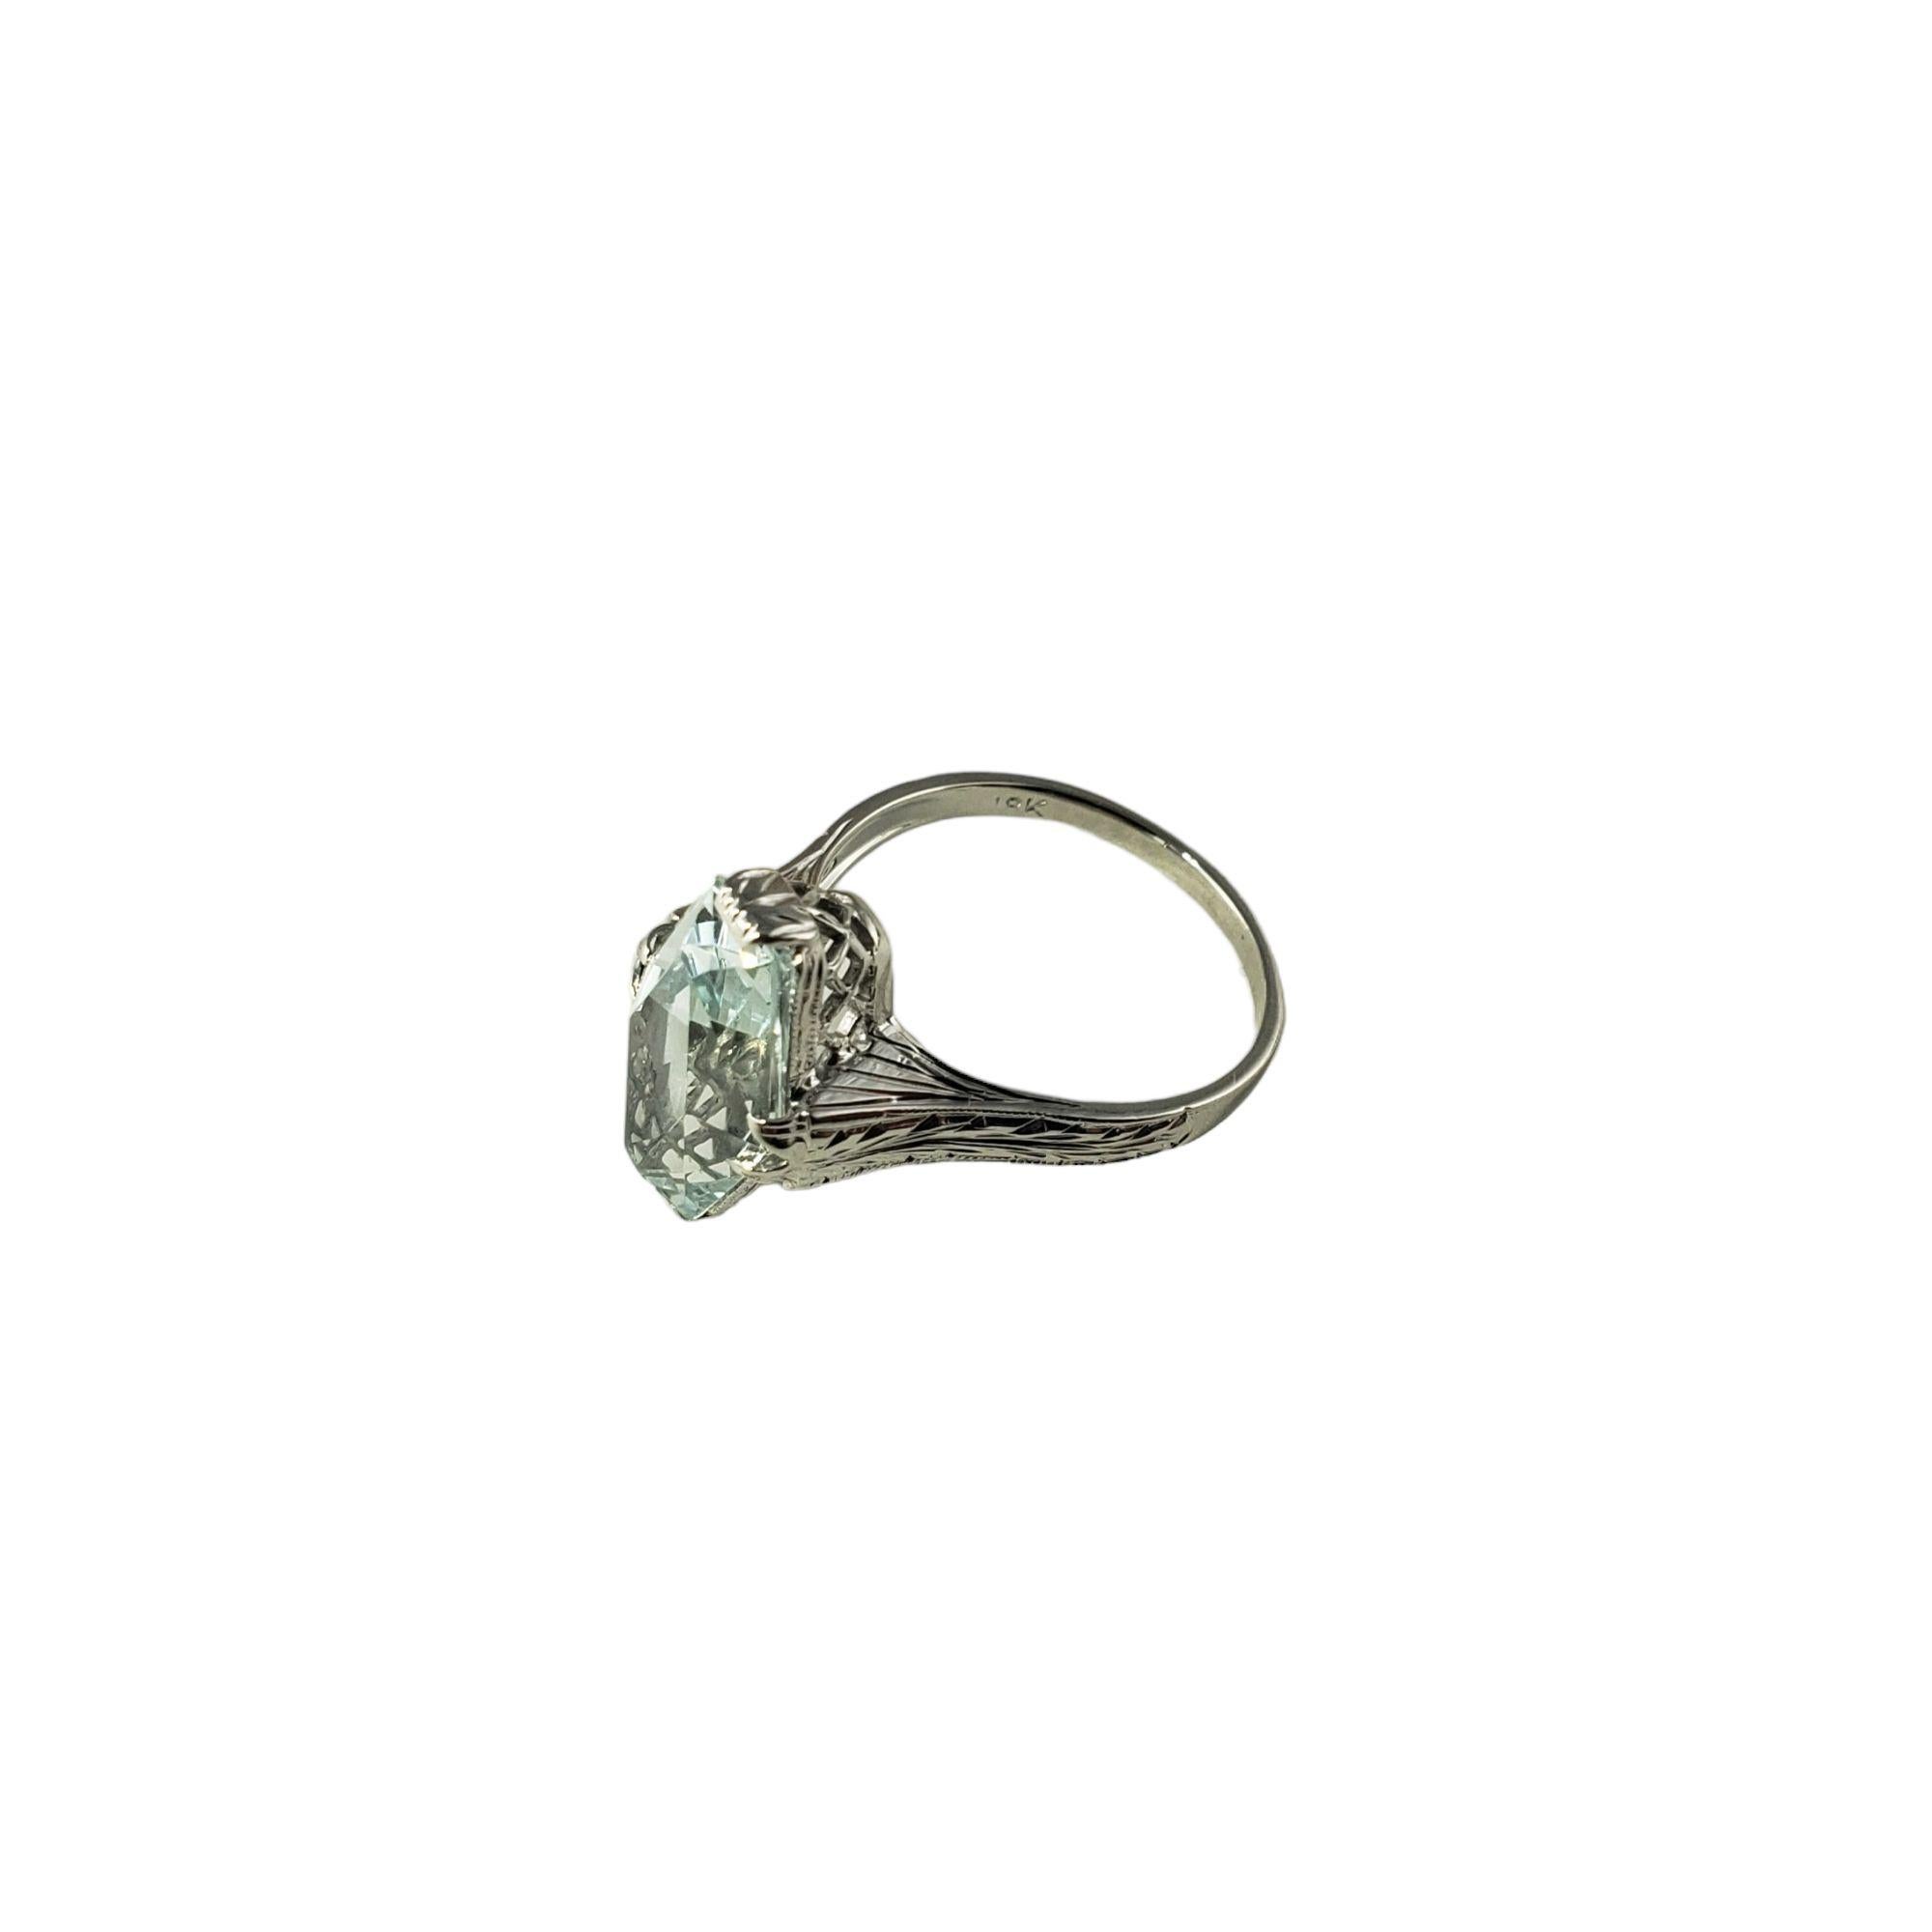 Vintage 18 Karat White Gold Aquamarine Ring Size 5.5 JAGi Certified-

This stunning ring features one hexagon shaped aquamarine set in beautifully detailed 18K white gold. Top of ring measures
15 mm x 10 mm. Shank: 2 mm.

Aquamarine weight: 3.95